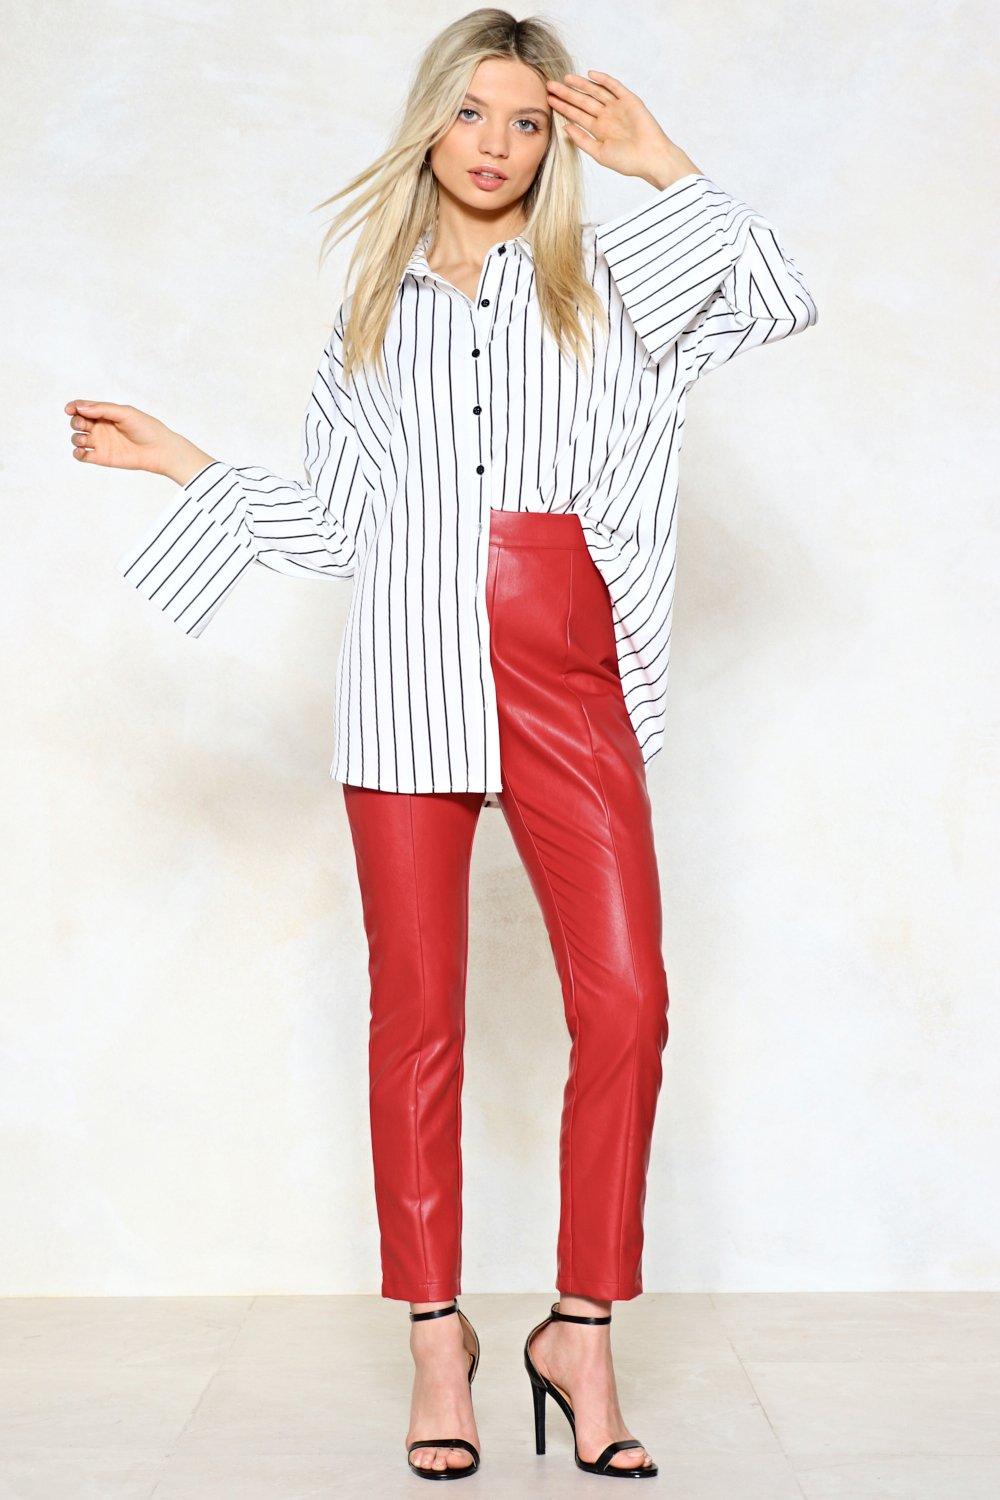 high waisted red leather pants